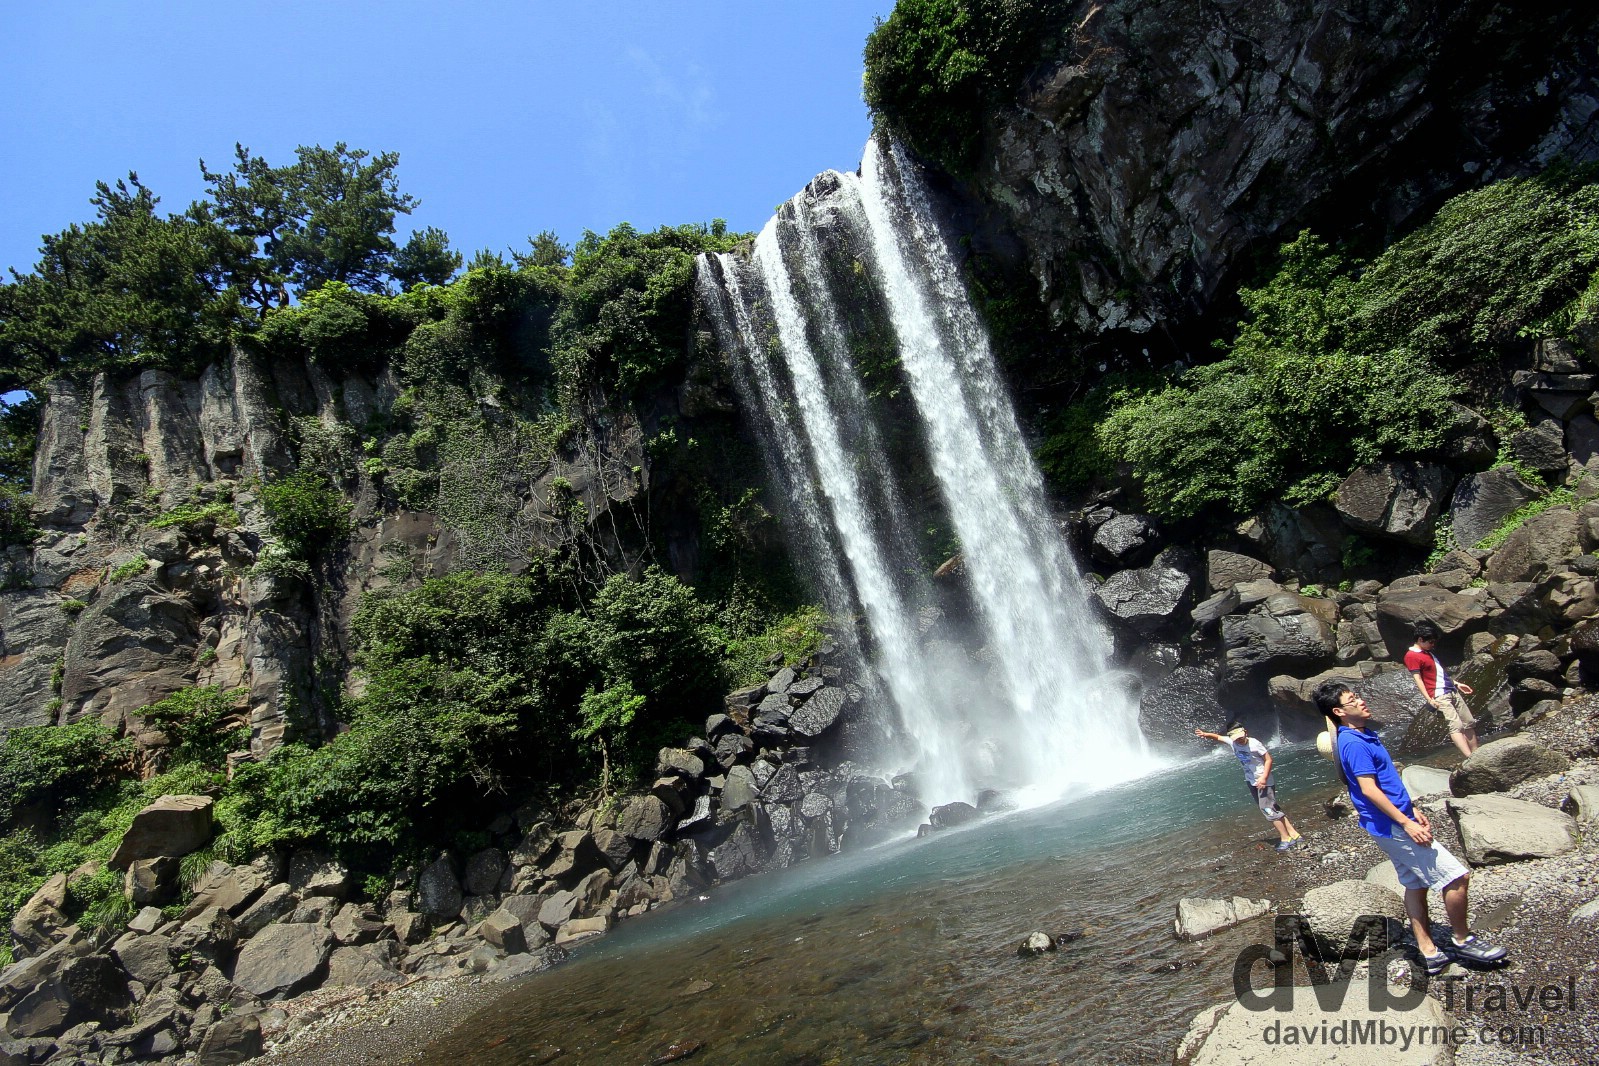 Jeongbang Waterfall, the only waterfall in Asia to fall directly into the ocean. Jeju Island, South Korea. July 16th 2011